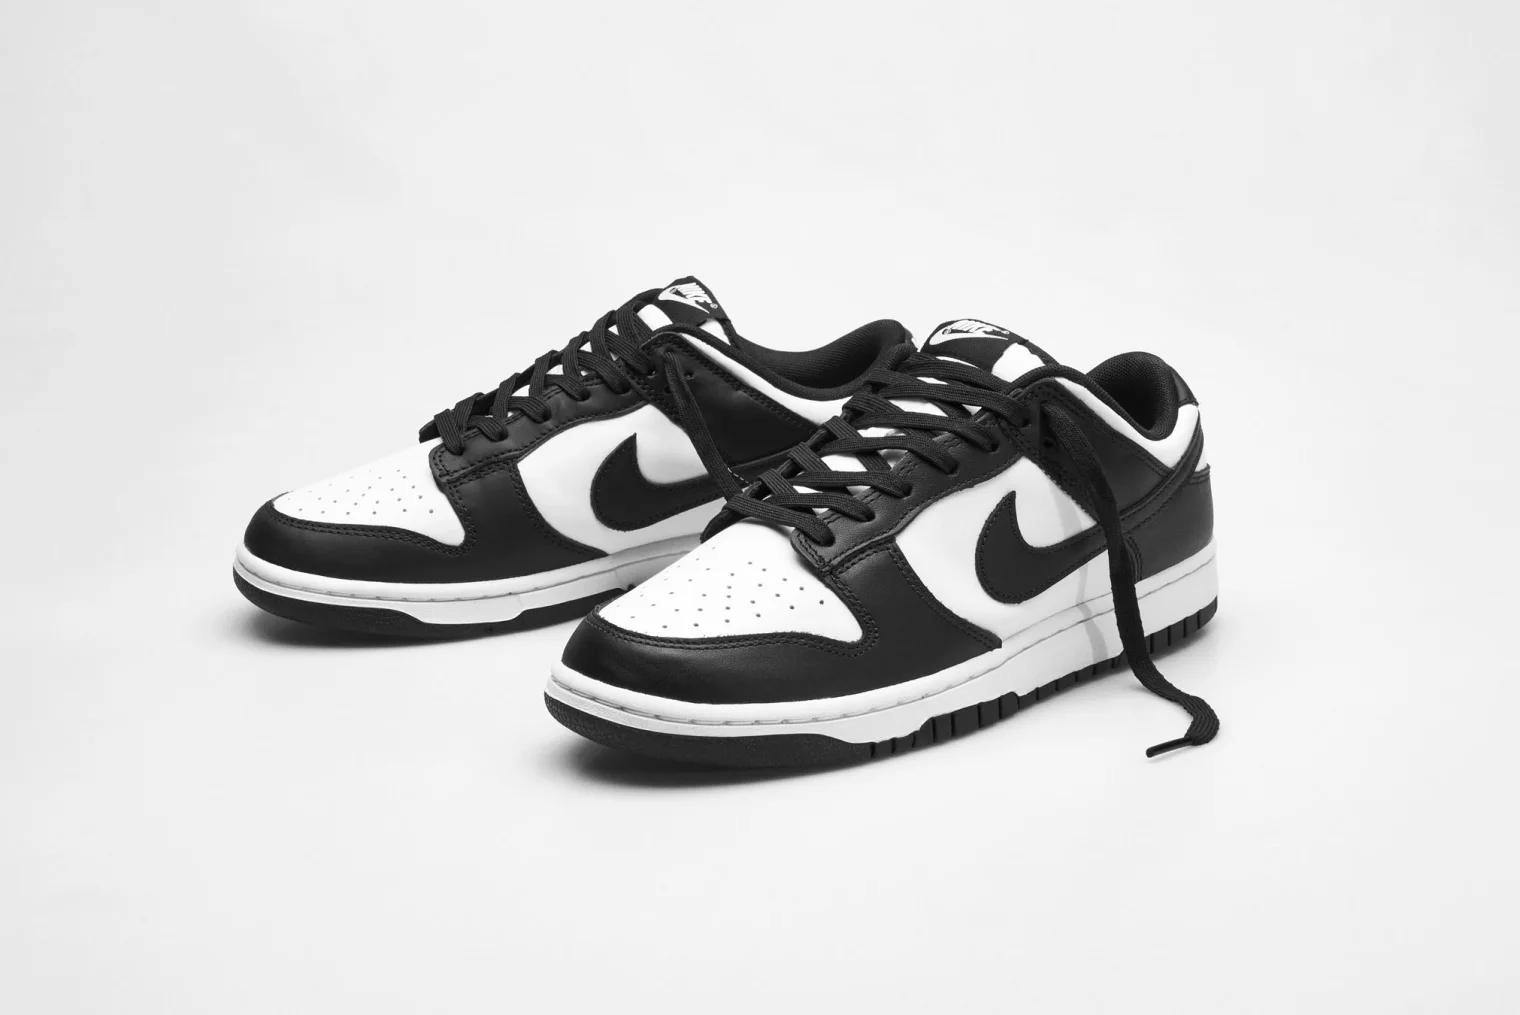 Dunk Low Panda: From Years of Instant Sell Outs to Retail Availability - An In-Depth Look